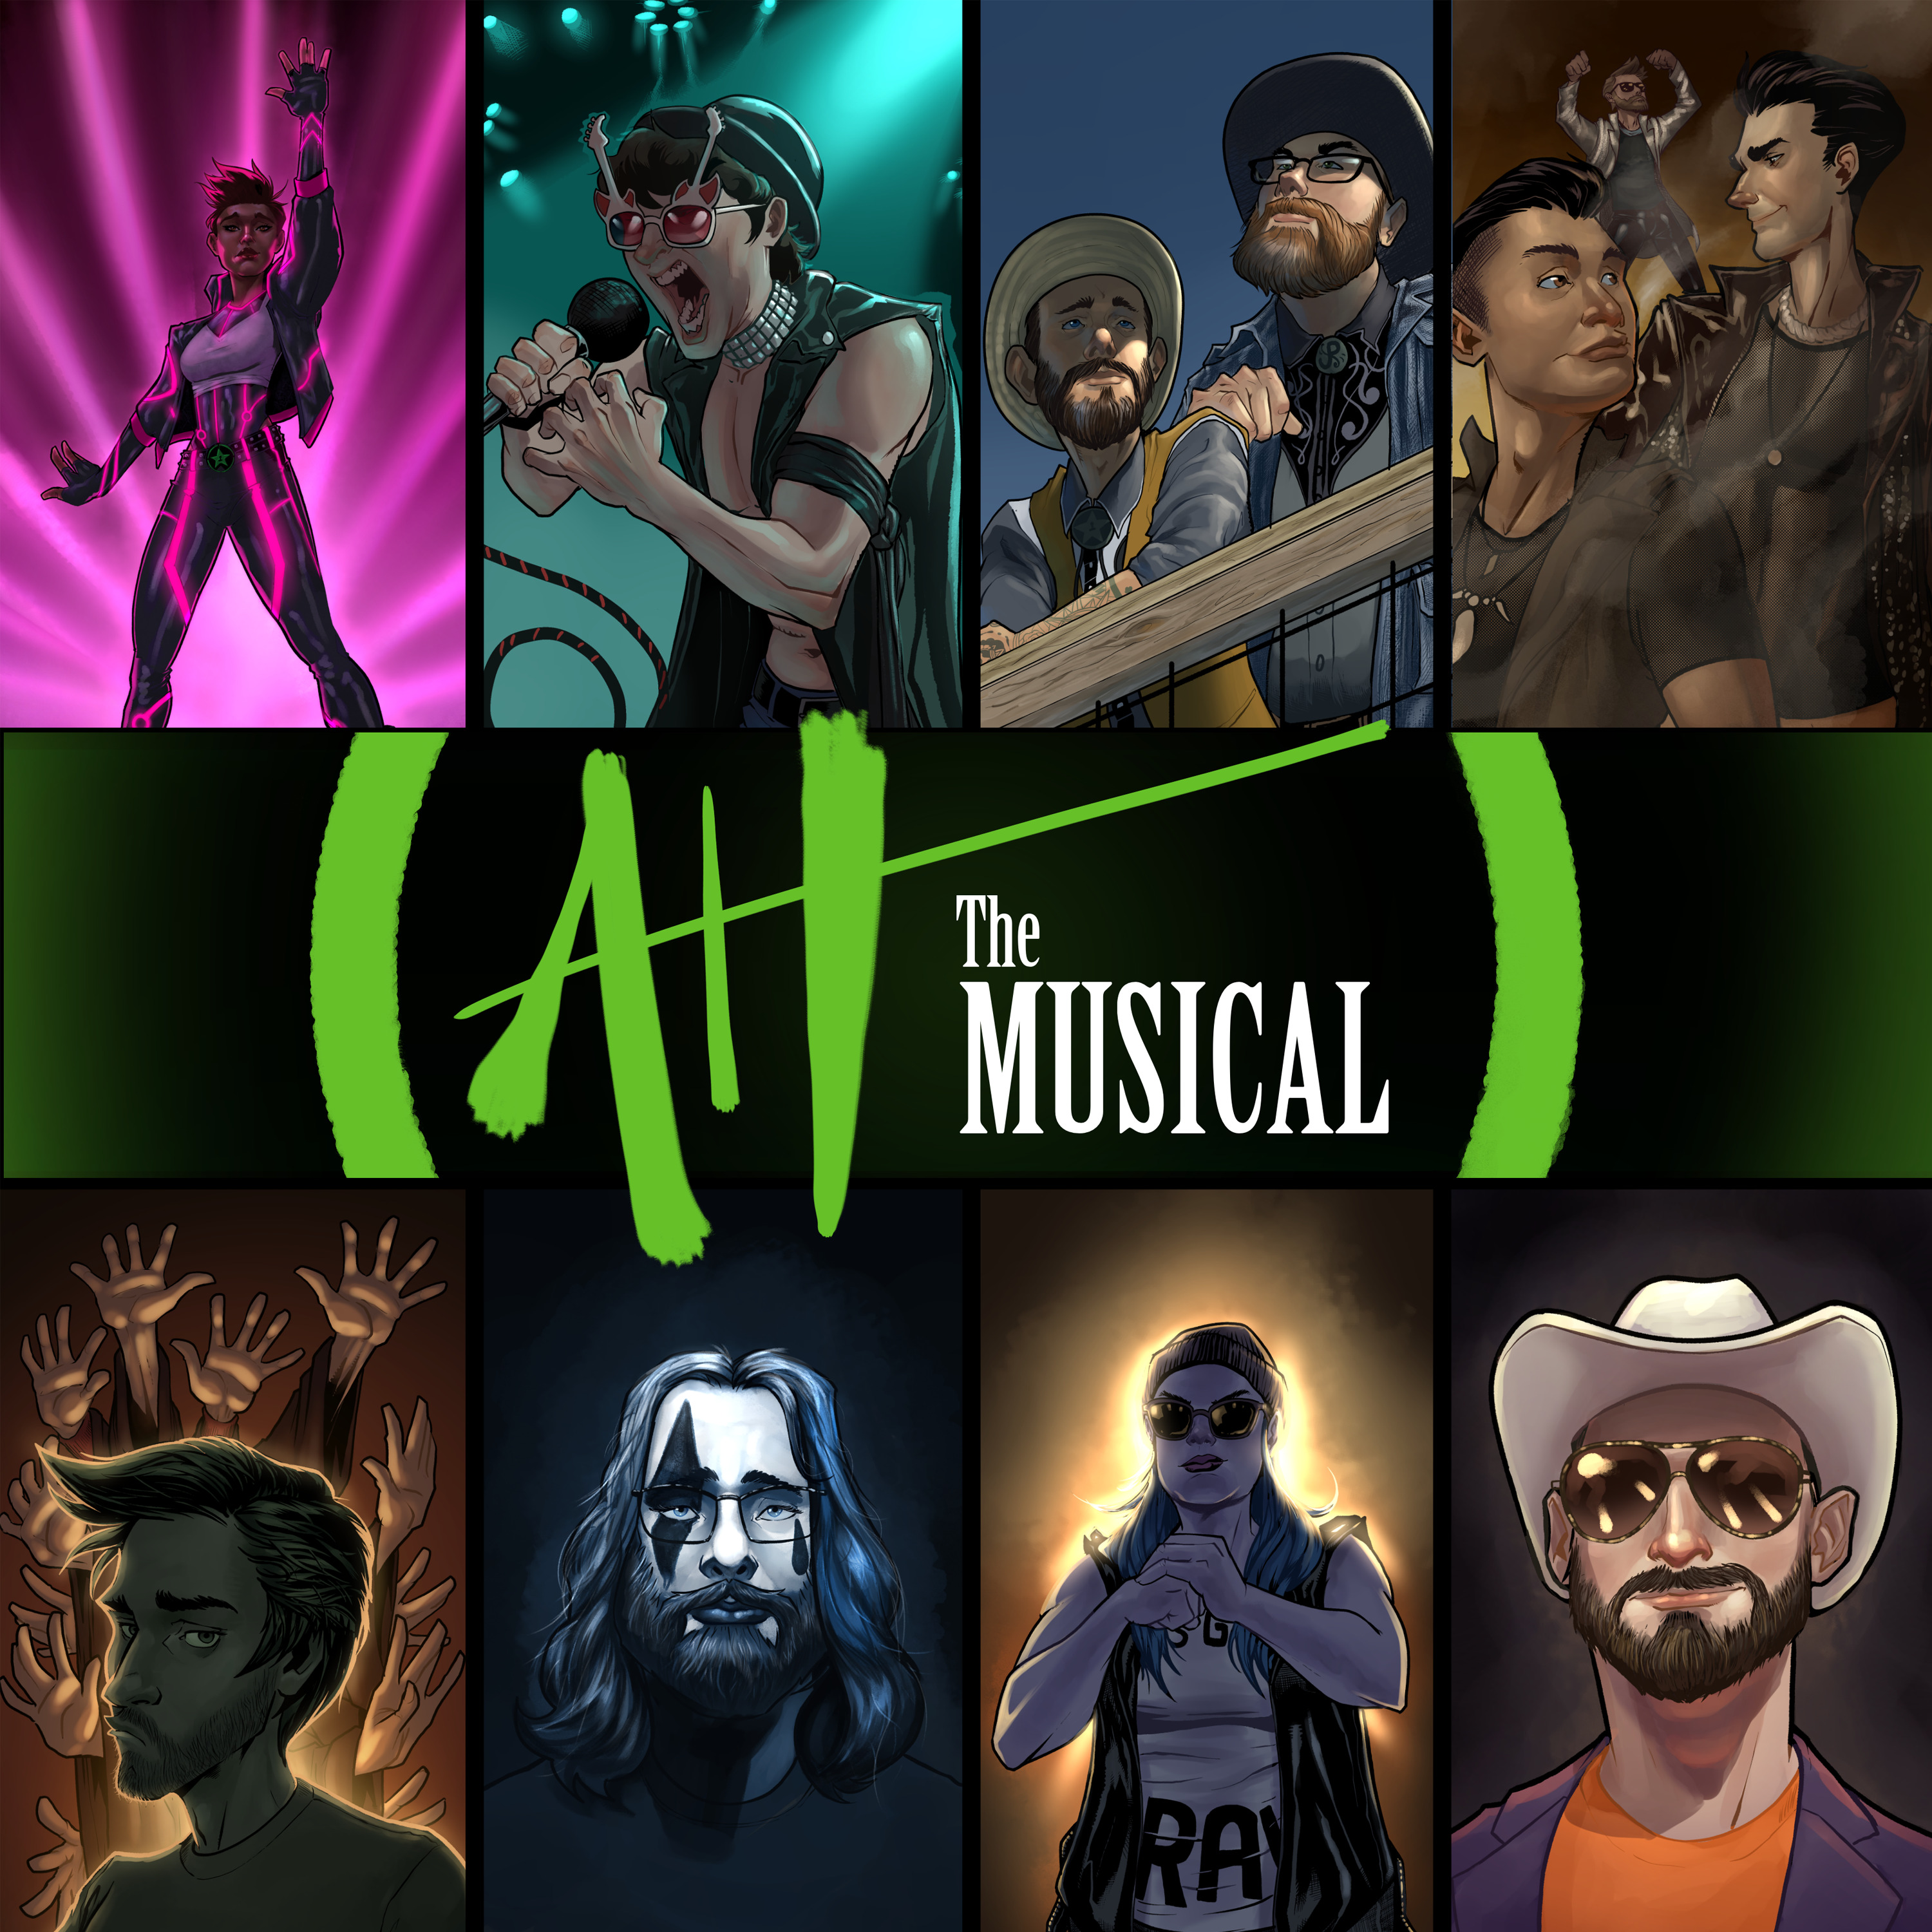 The album cover art of Achievement Hunter: The Musical. Stylized text reading "AH The MUSICAL" is in the center, while eight boxes containing members of AH (four boxes on top, four on bottom) take up the rest of the remaining space. Top row: Fiona (Unknown Song Title), Michael (Get Sprunked), Jack and Geoff (Team OG), Gavin, Trevor, and Alfredo (Hard to Breathe). Bottom row: Gavin by himself (Gavin is a Prick), Matt (Matt's Song), Lindsay (Lindsay Wins), and Jeremy (Good at Being Bad).